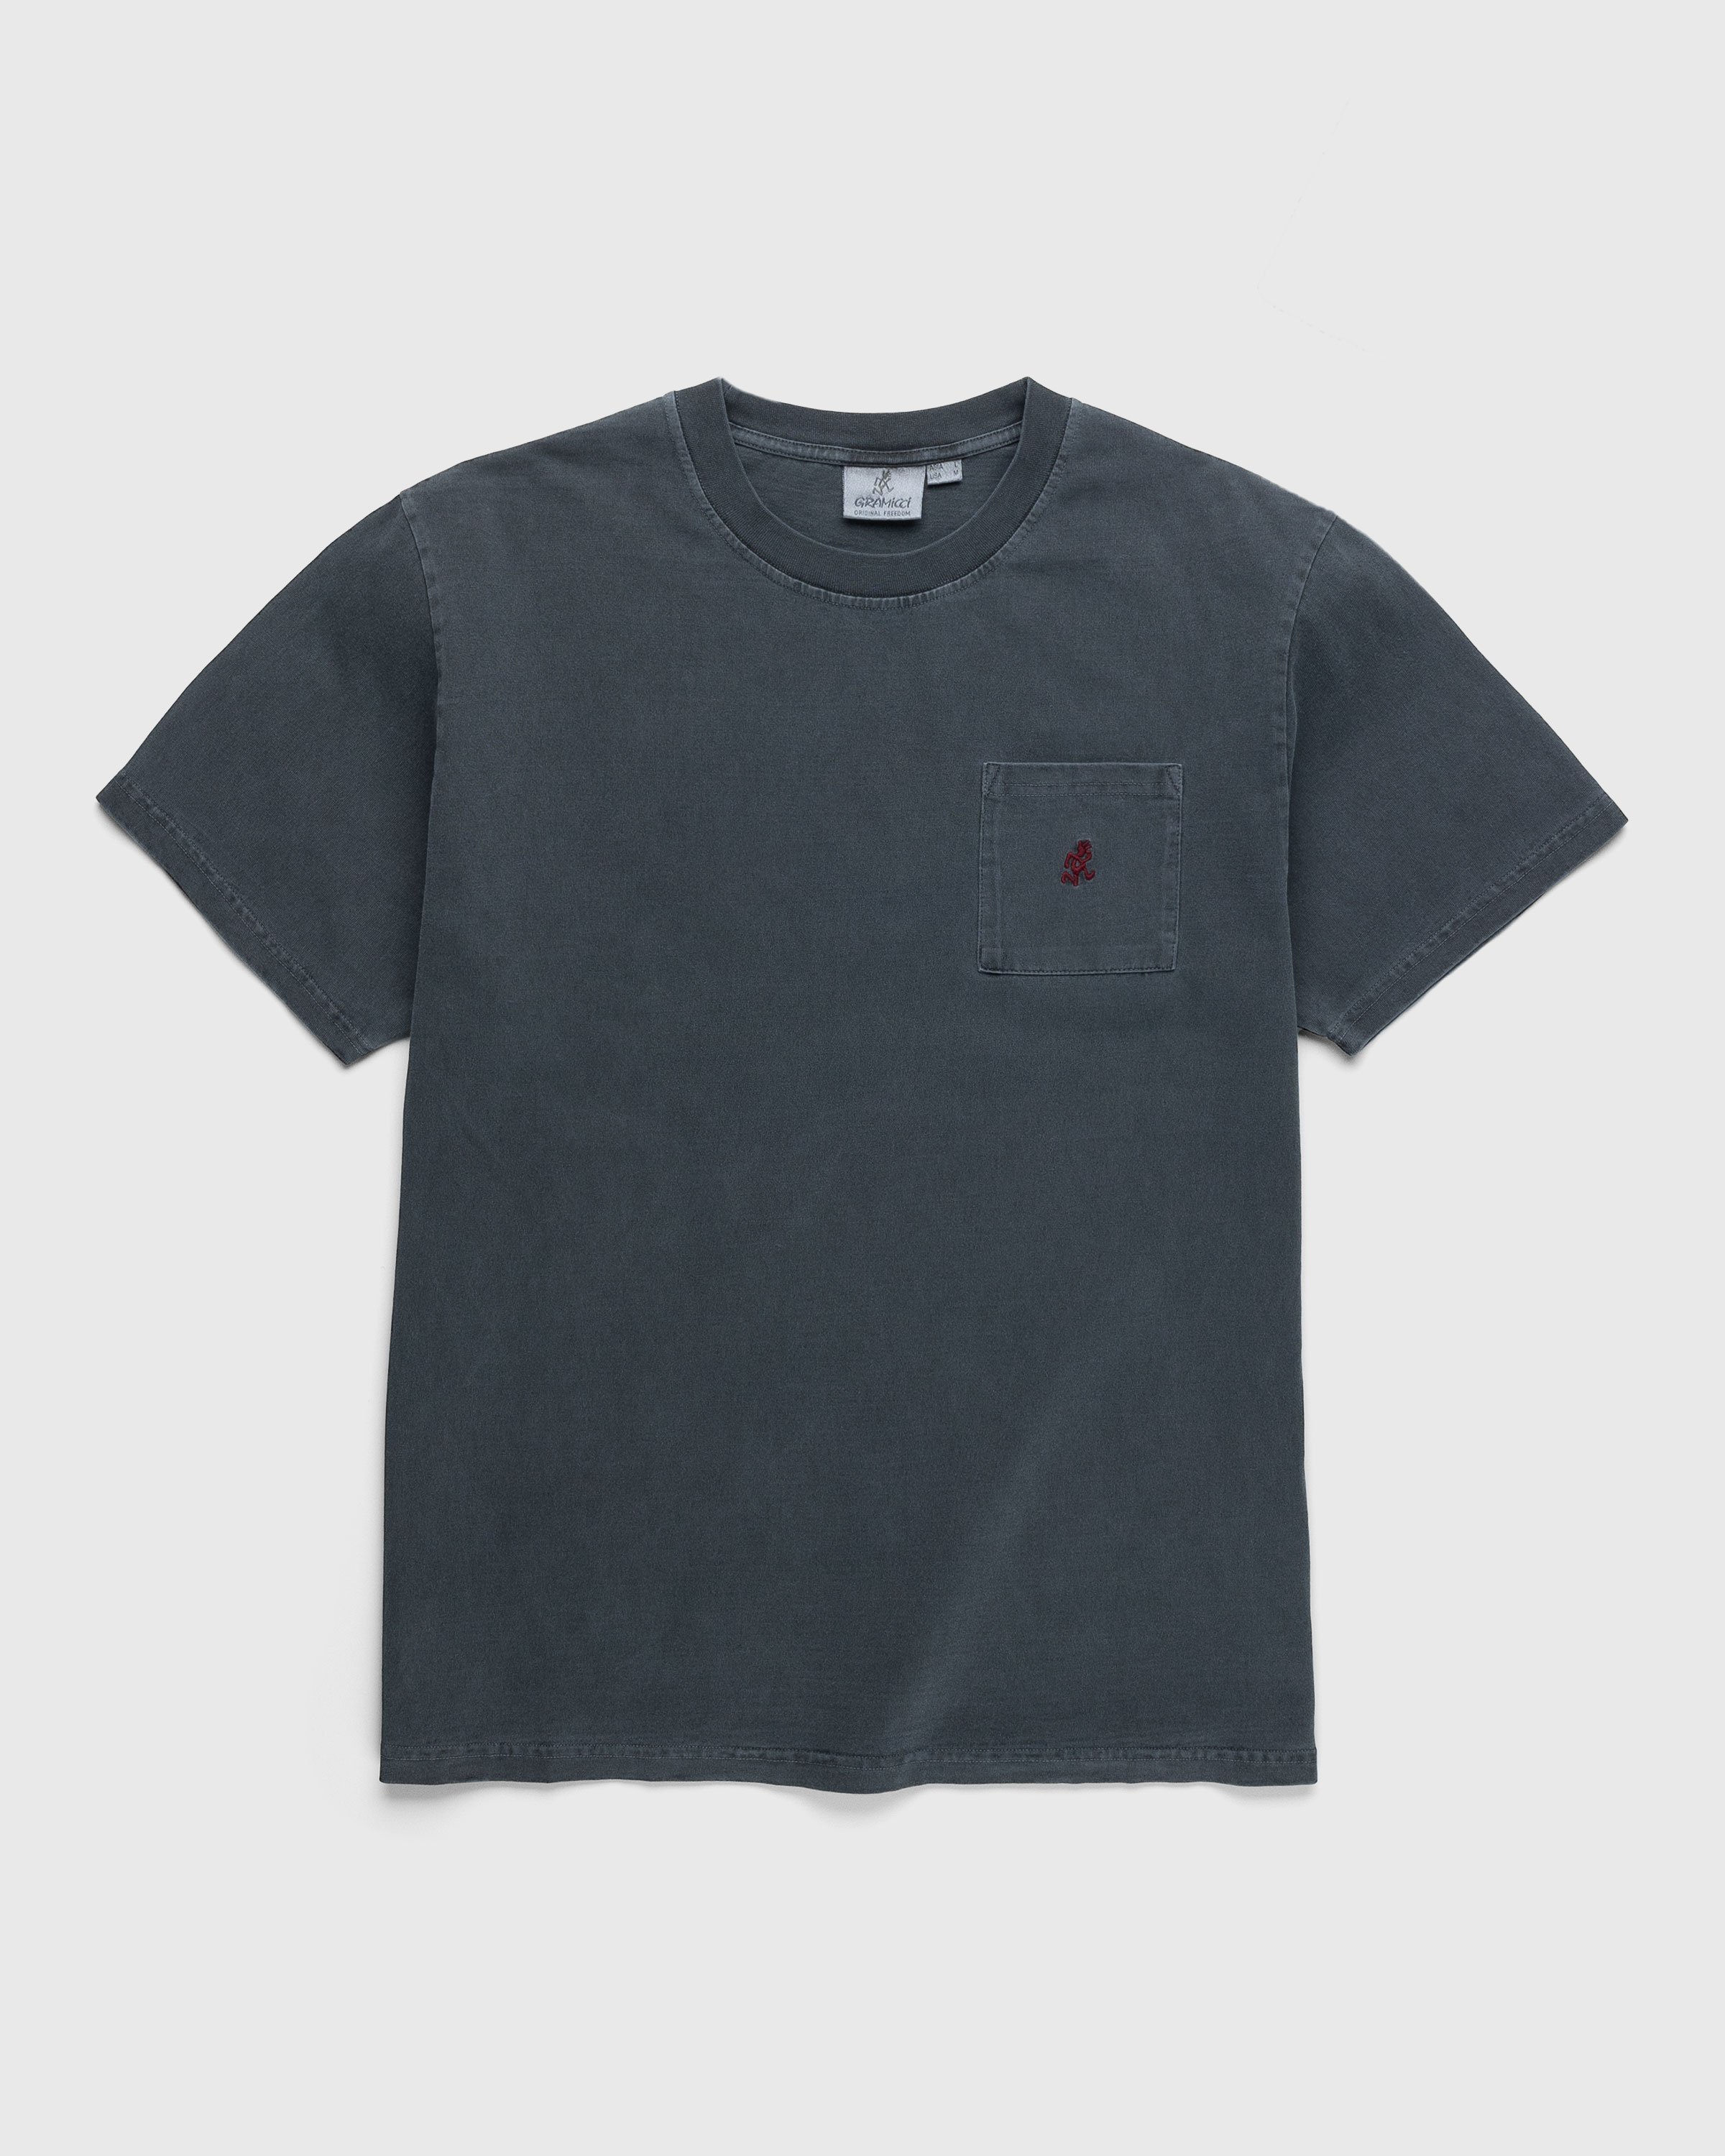 Gramicci - One Point Tee Grey Pigment - Clothing - Grey - Image 1